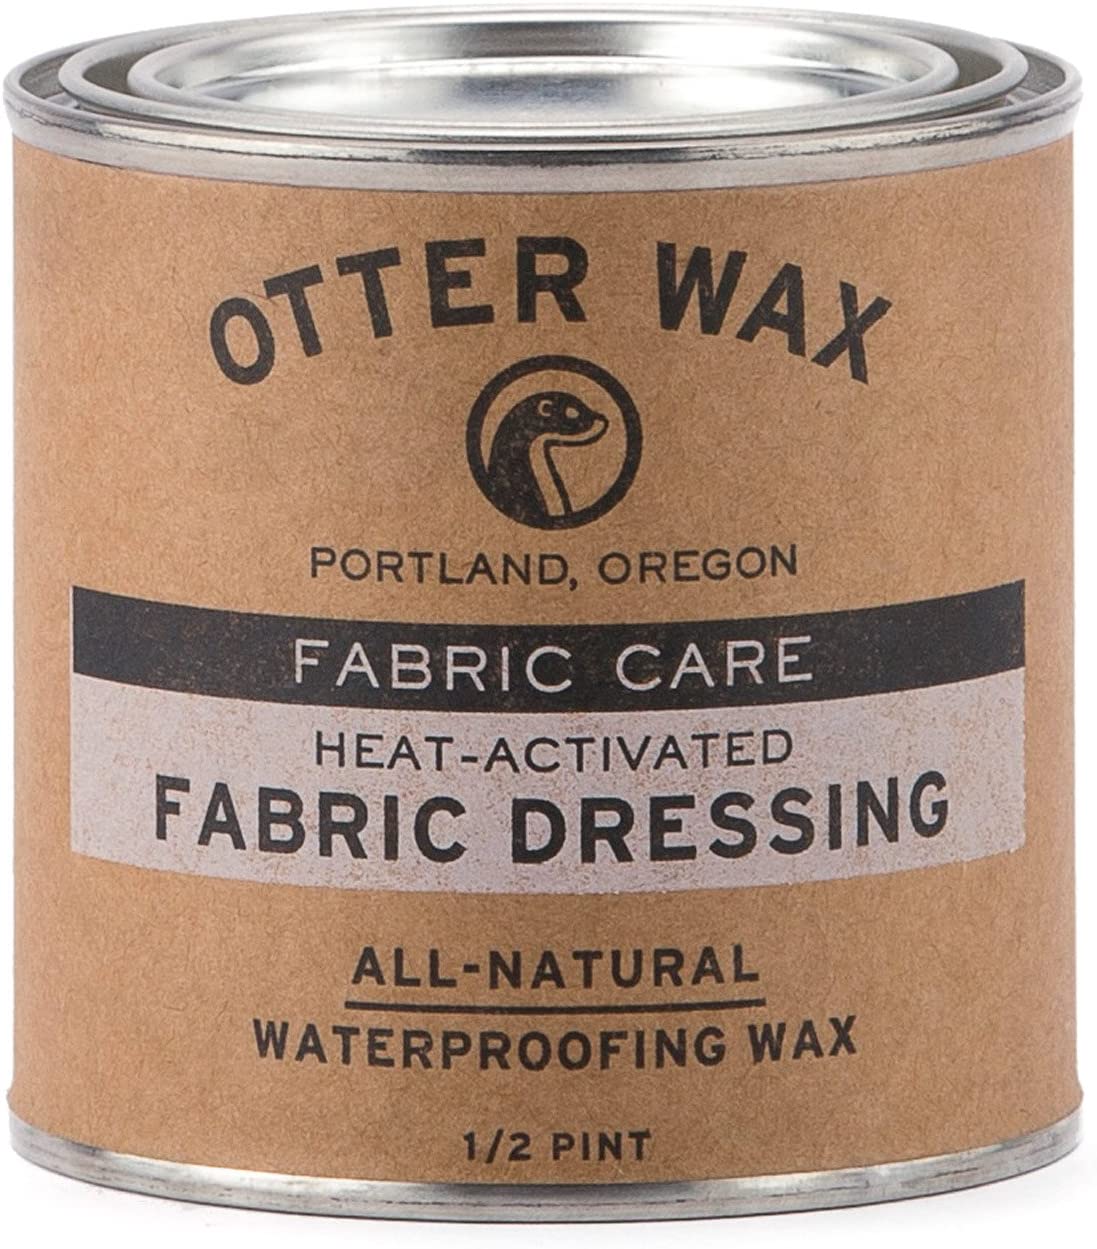 Otter Wax Heat-Activated Fabric Dressing, 1/2 Pint, Waterproofing Wax